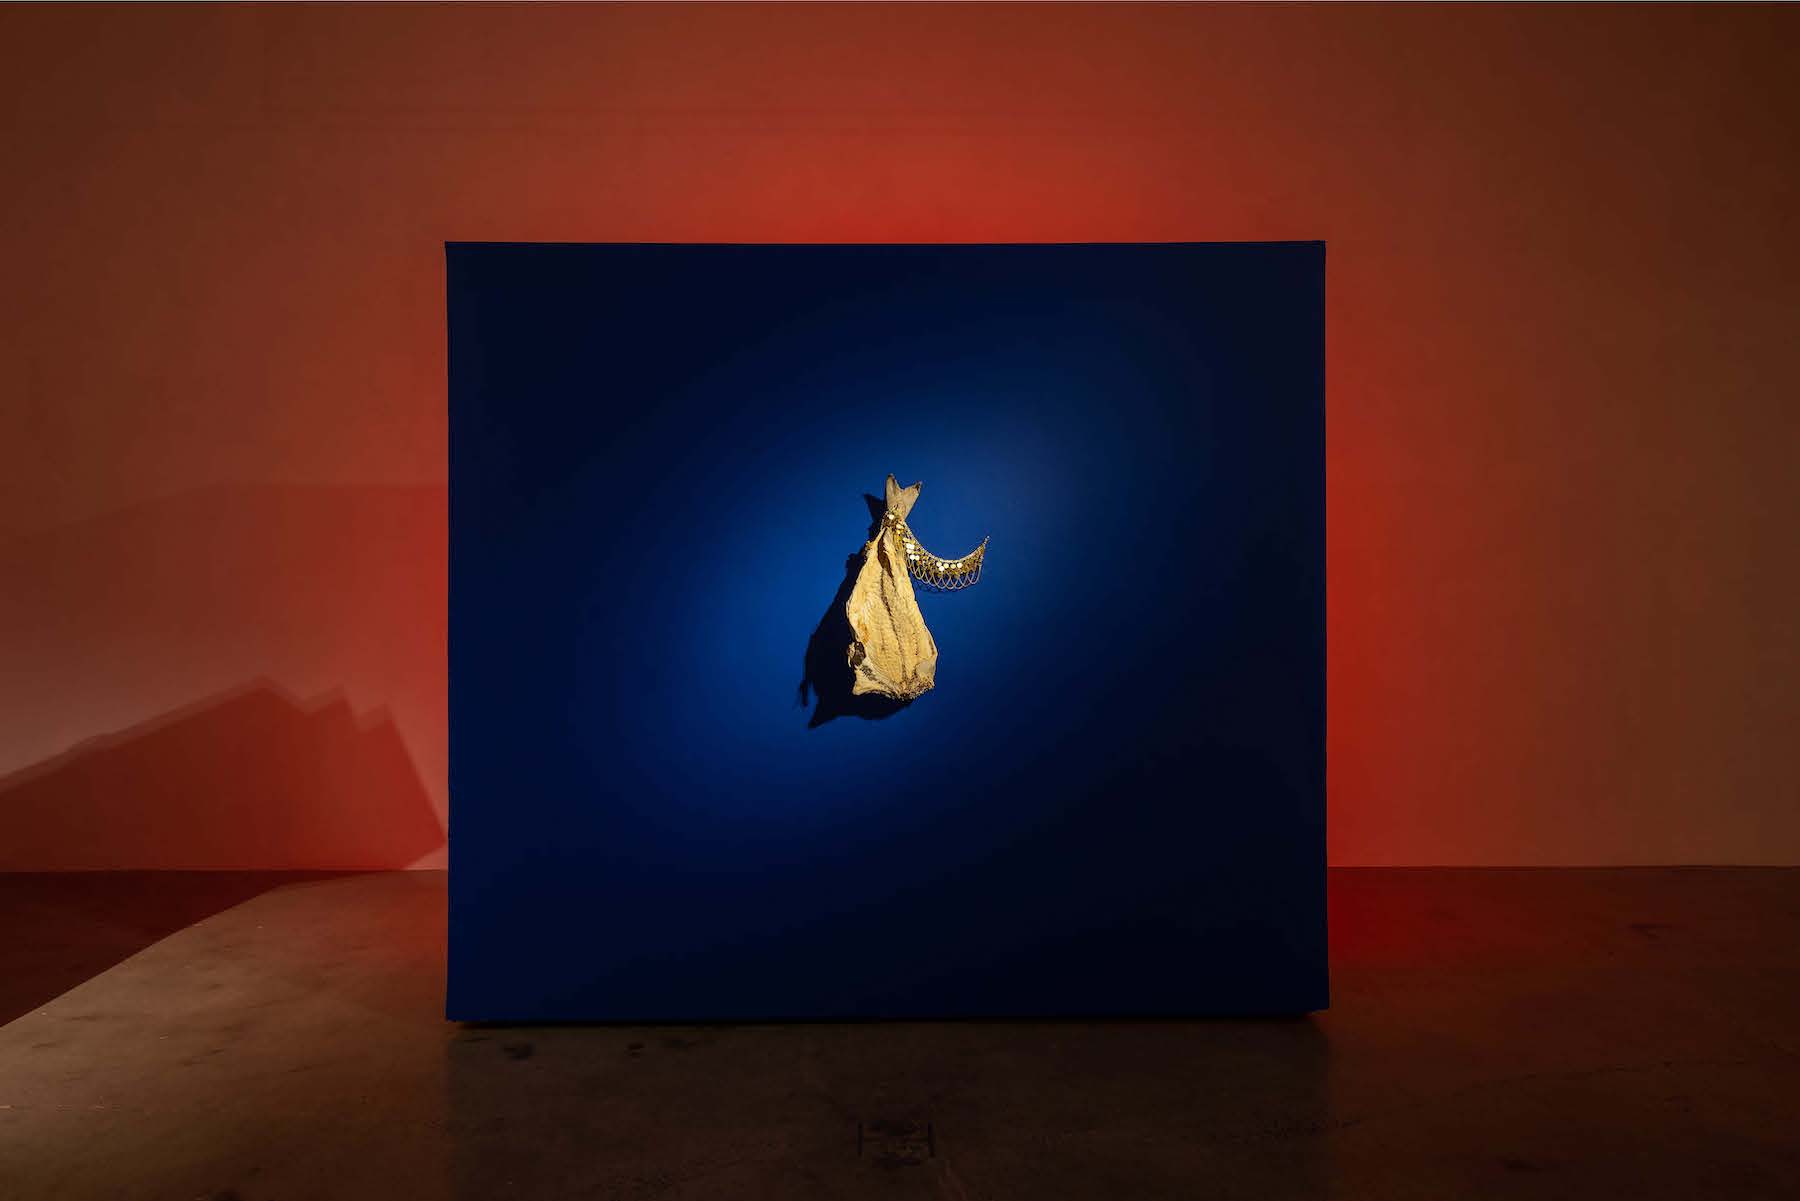 A fish tacked against a blue wall with a piece of gold jewelry attached to it.